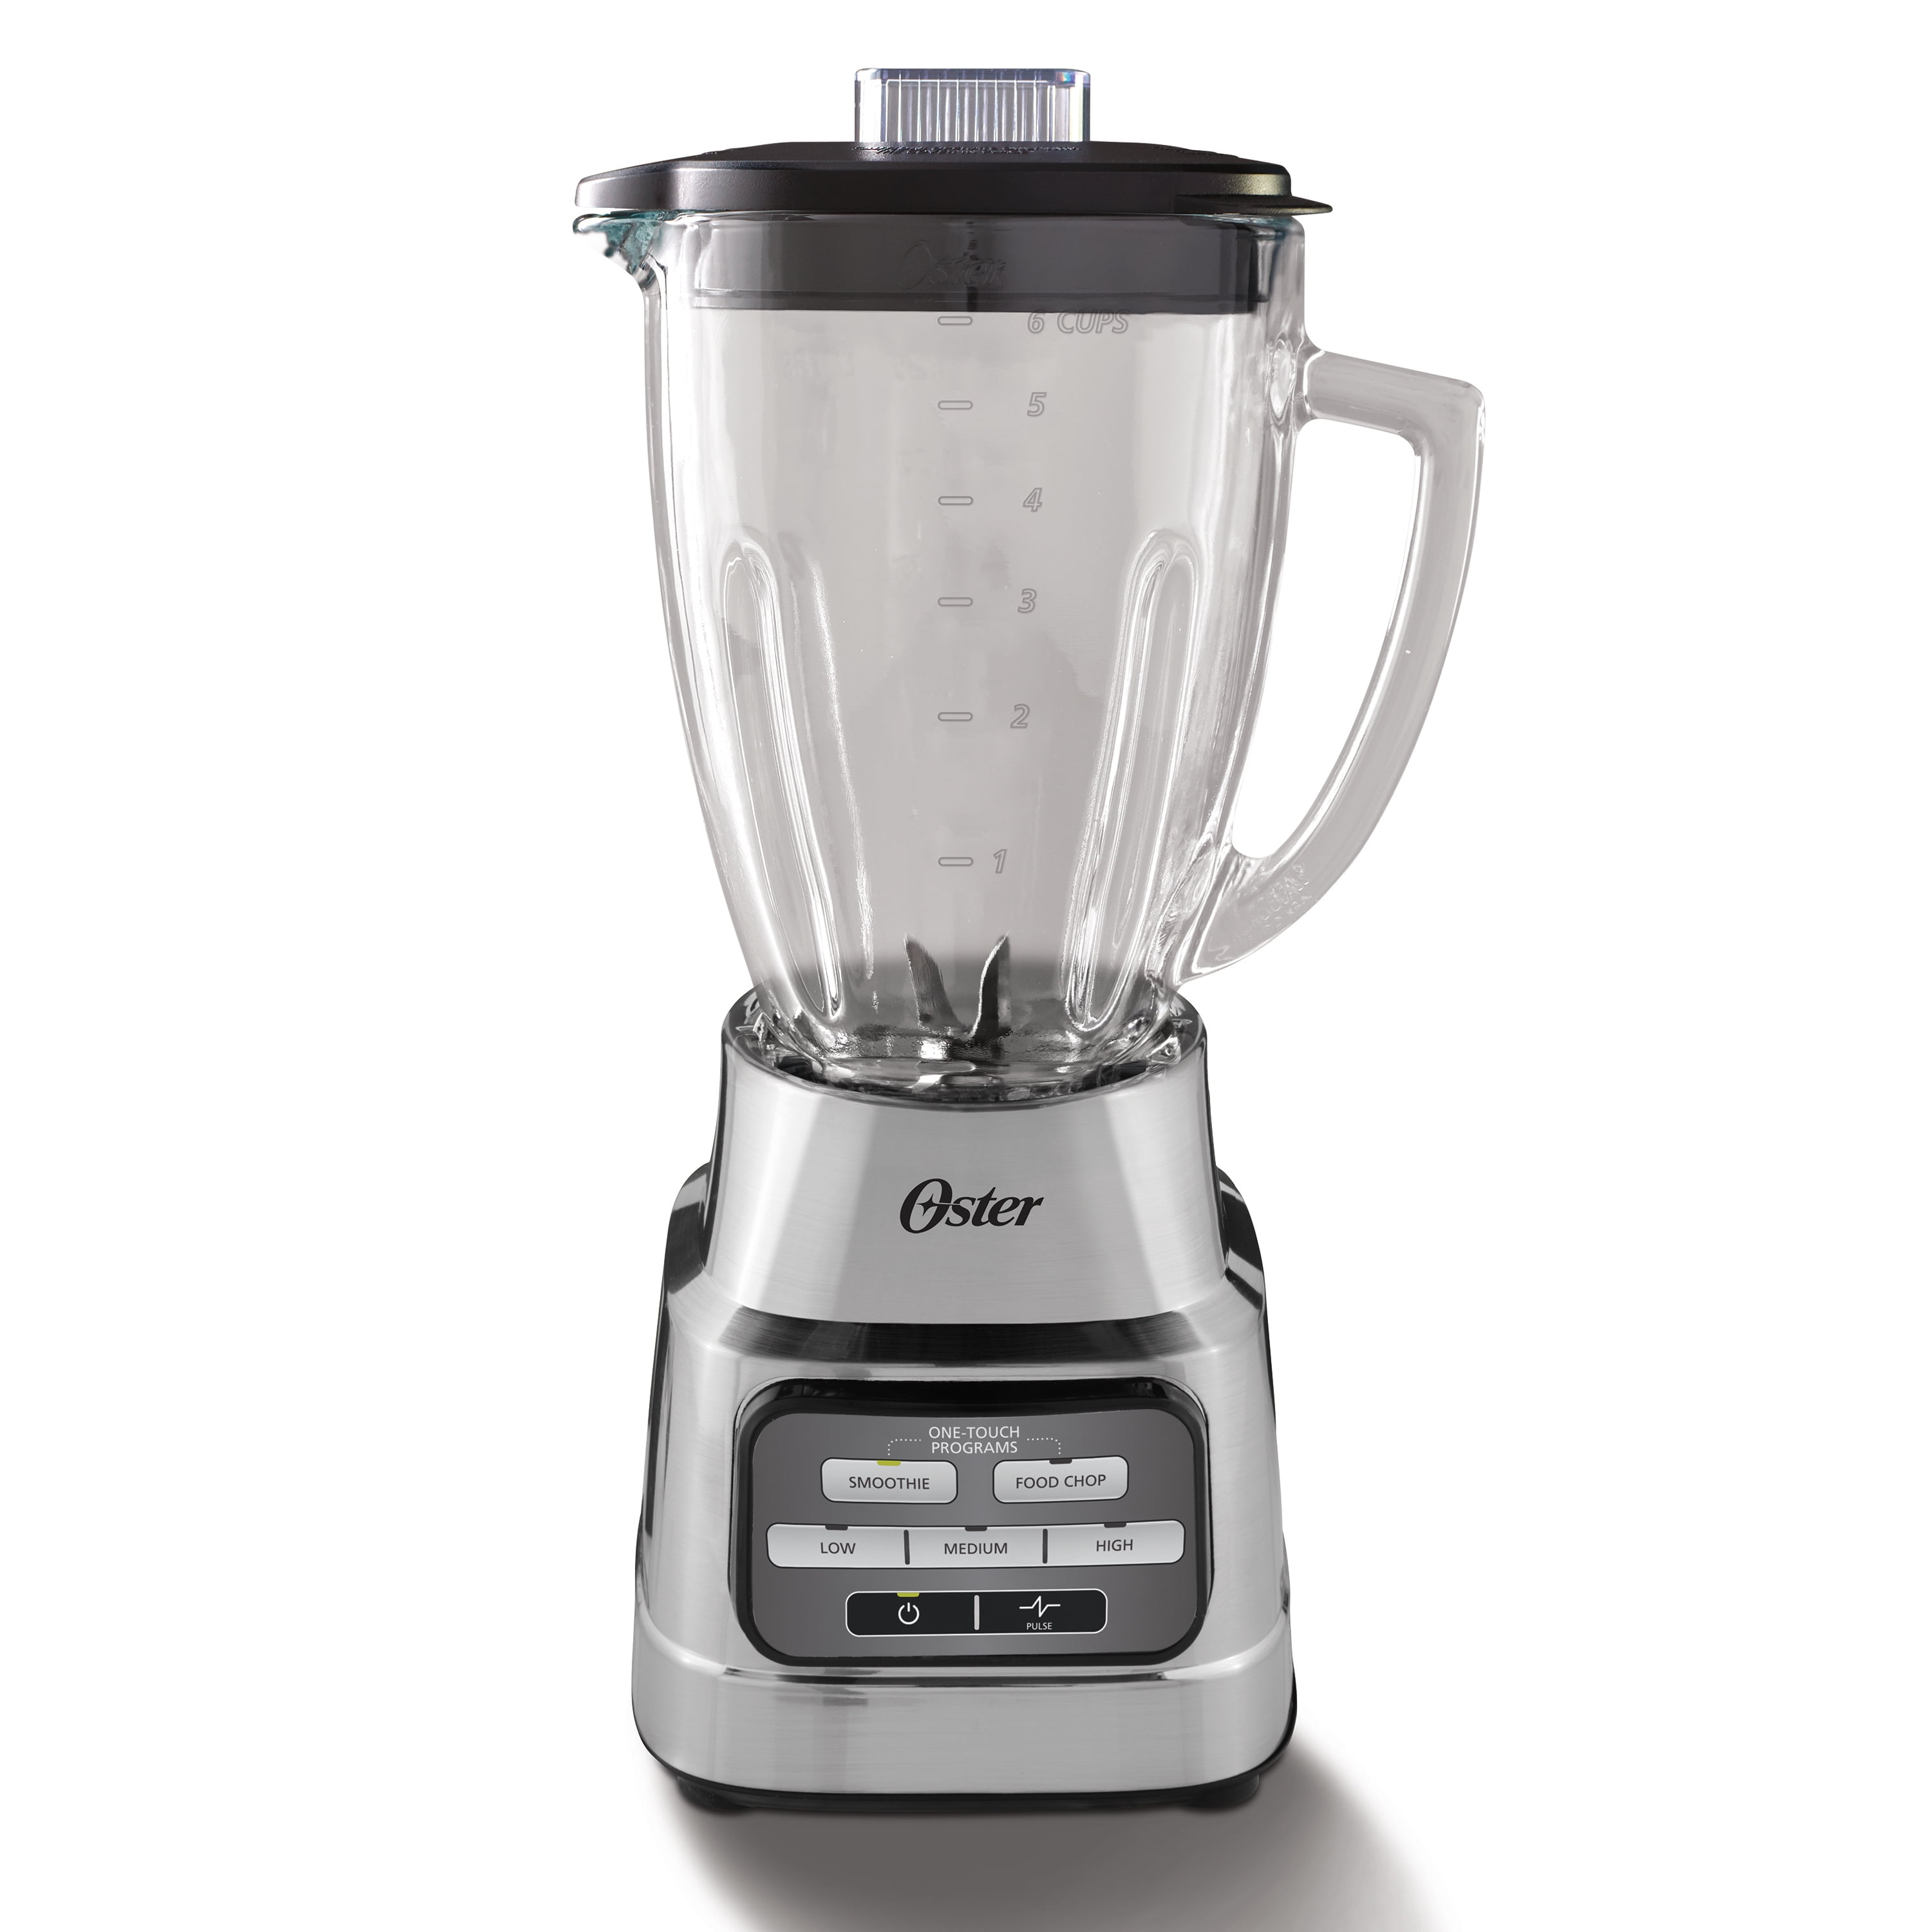 Oster One-Touch Blender with Auto-Programs and 6-Cup Boroclass Glass Jar - 1